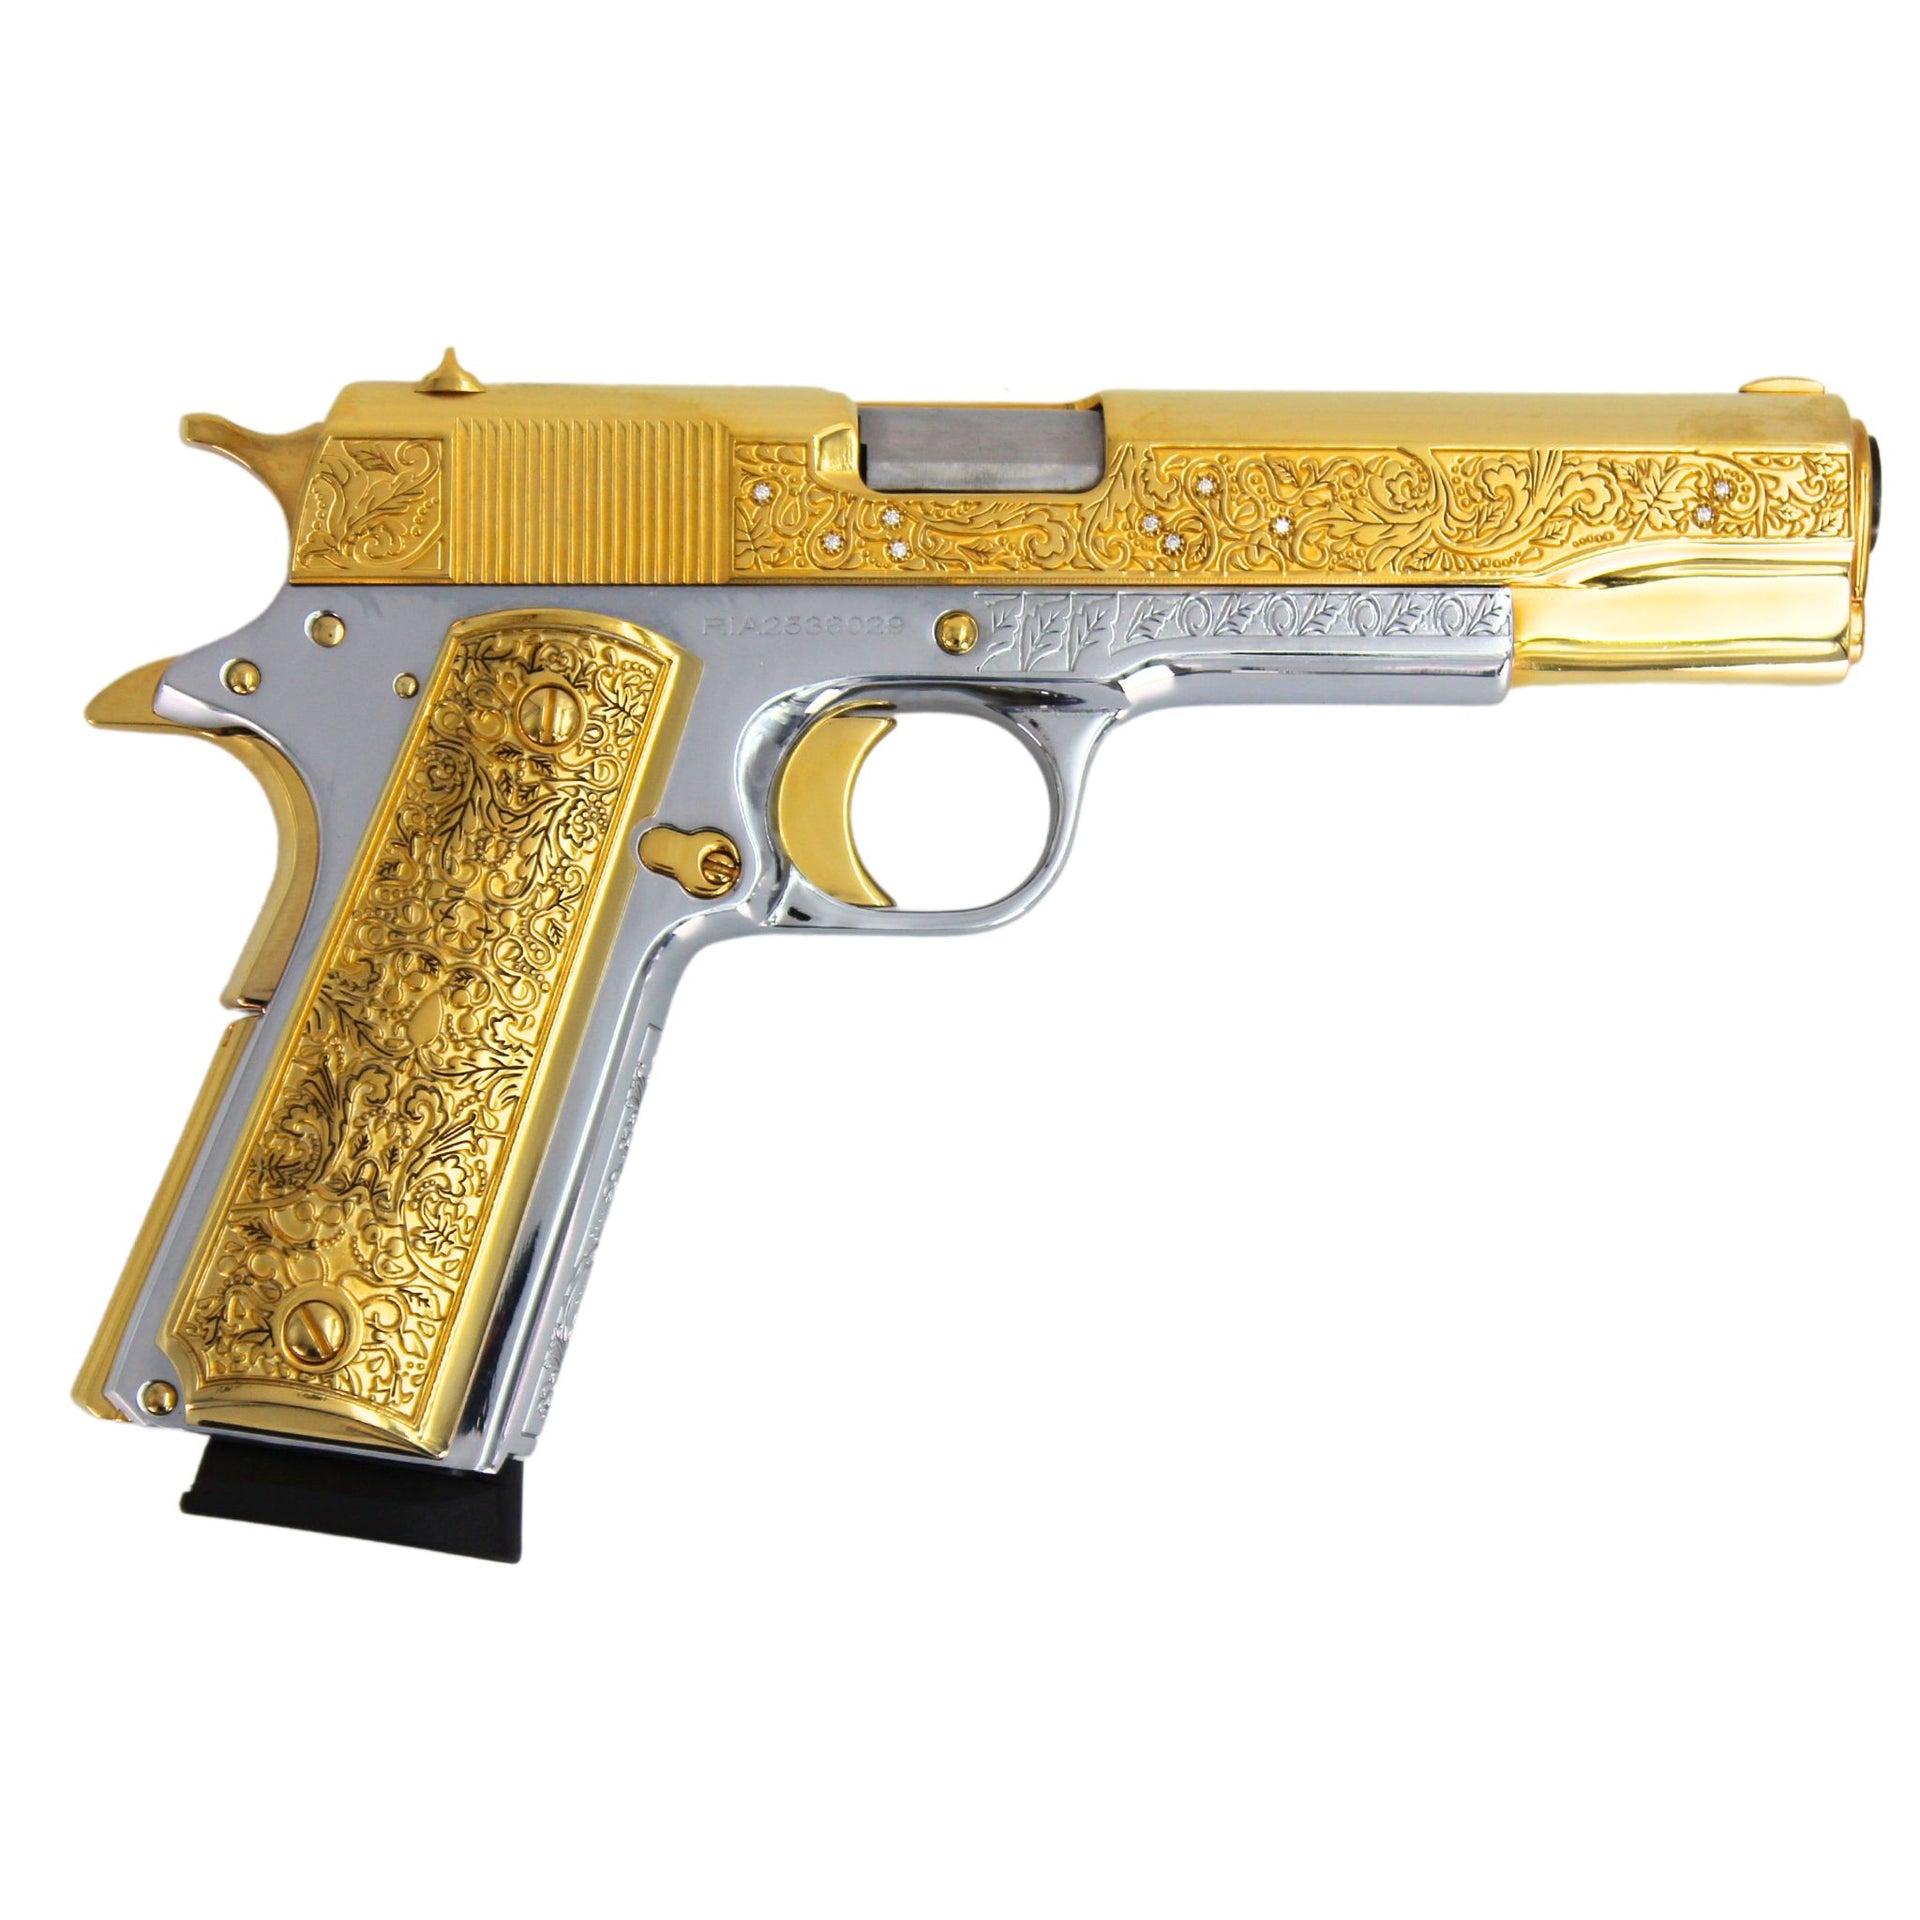 Rock Island 1911 Standard FS, 45 ACP, Vine and Berries with Diamonds, 24 karat Gold plated and High Polished White Chrome, SKU: 7010461778022,  Gold Gun,  Gold Firearm, Engraved Firearm  